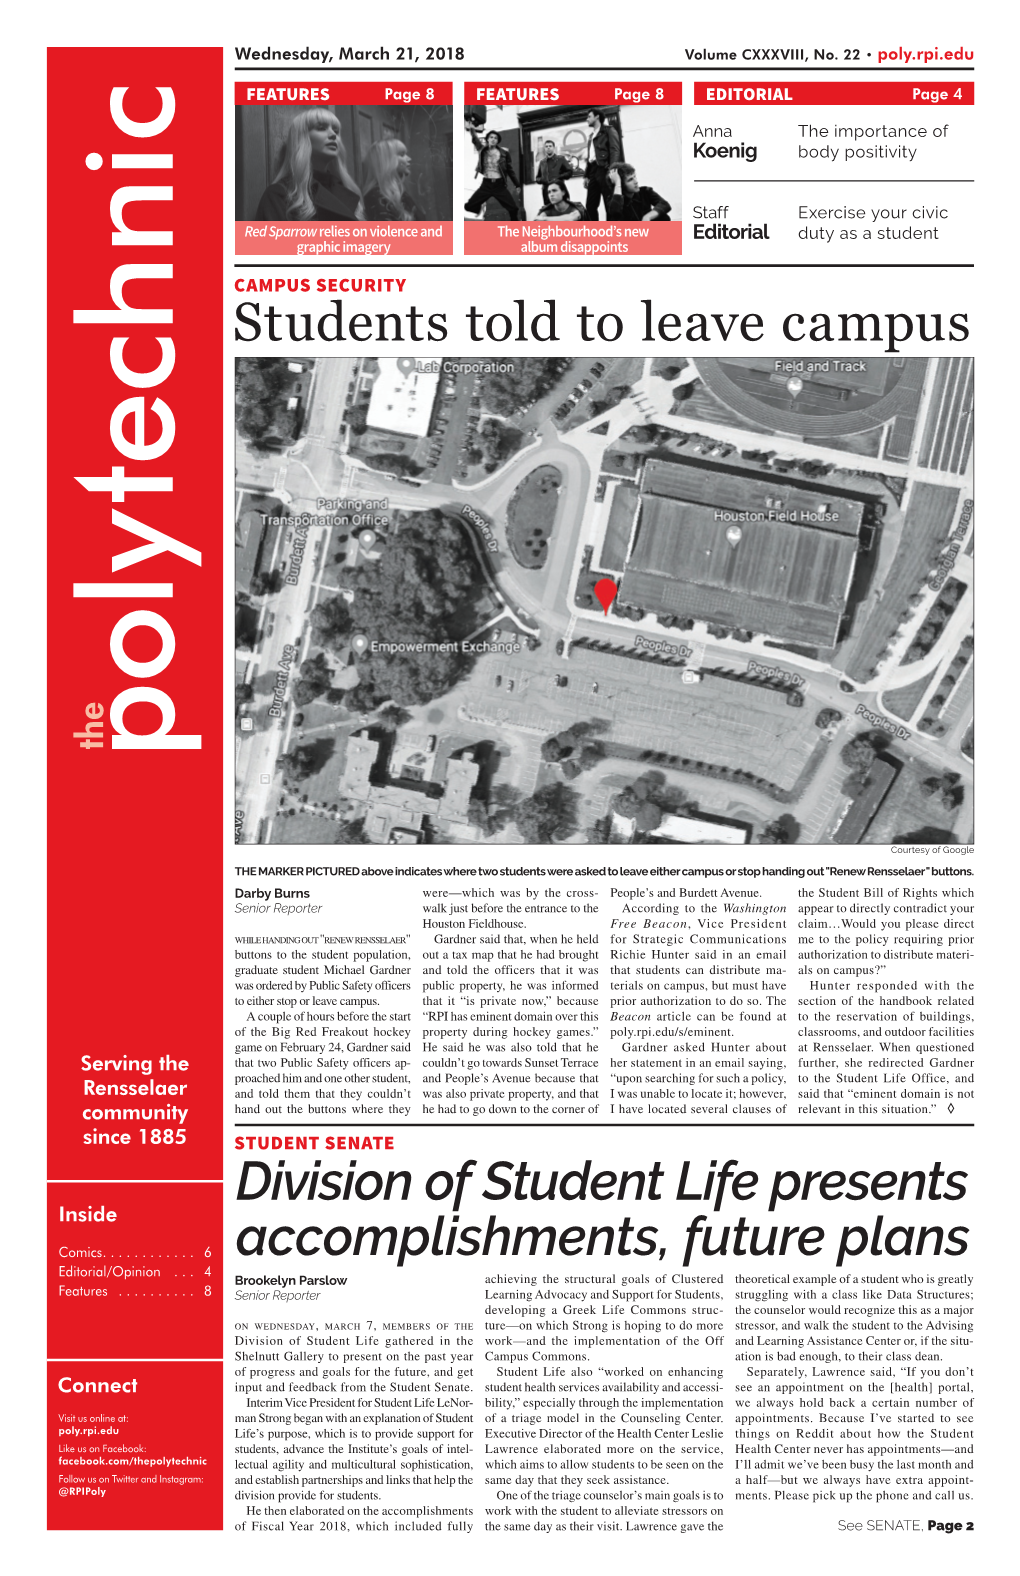 Students Told to Leave Campus Division of Student Life Presents